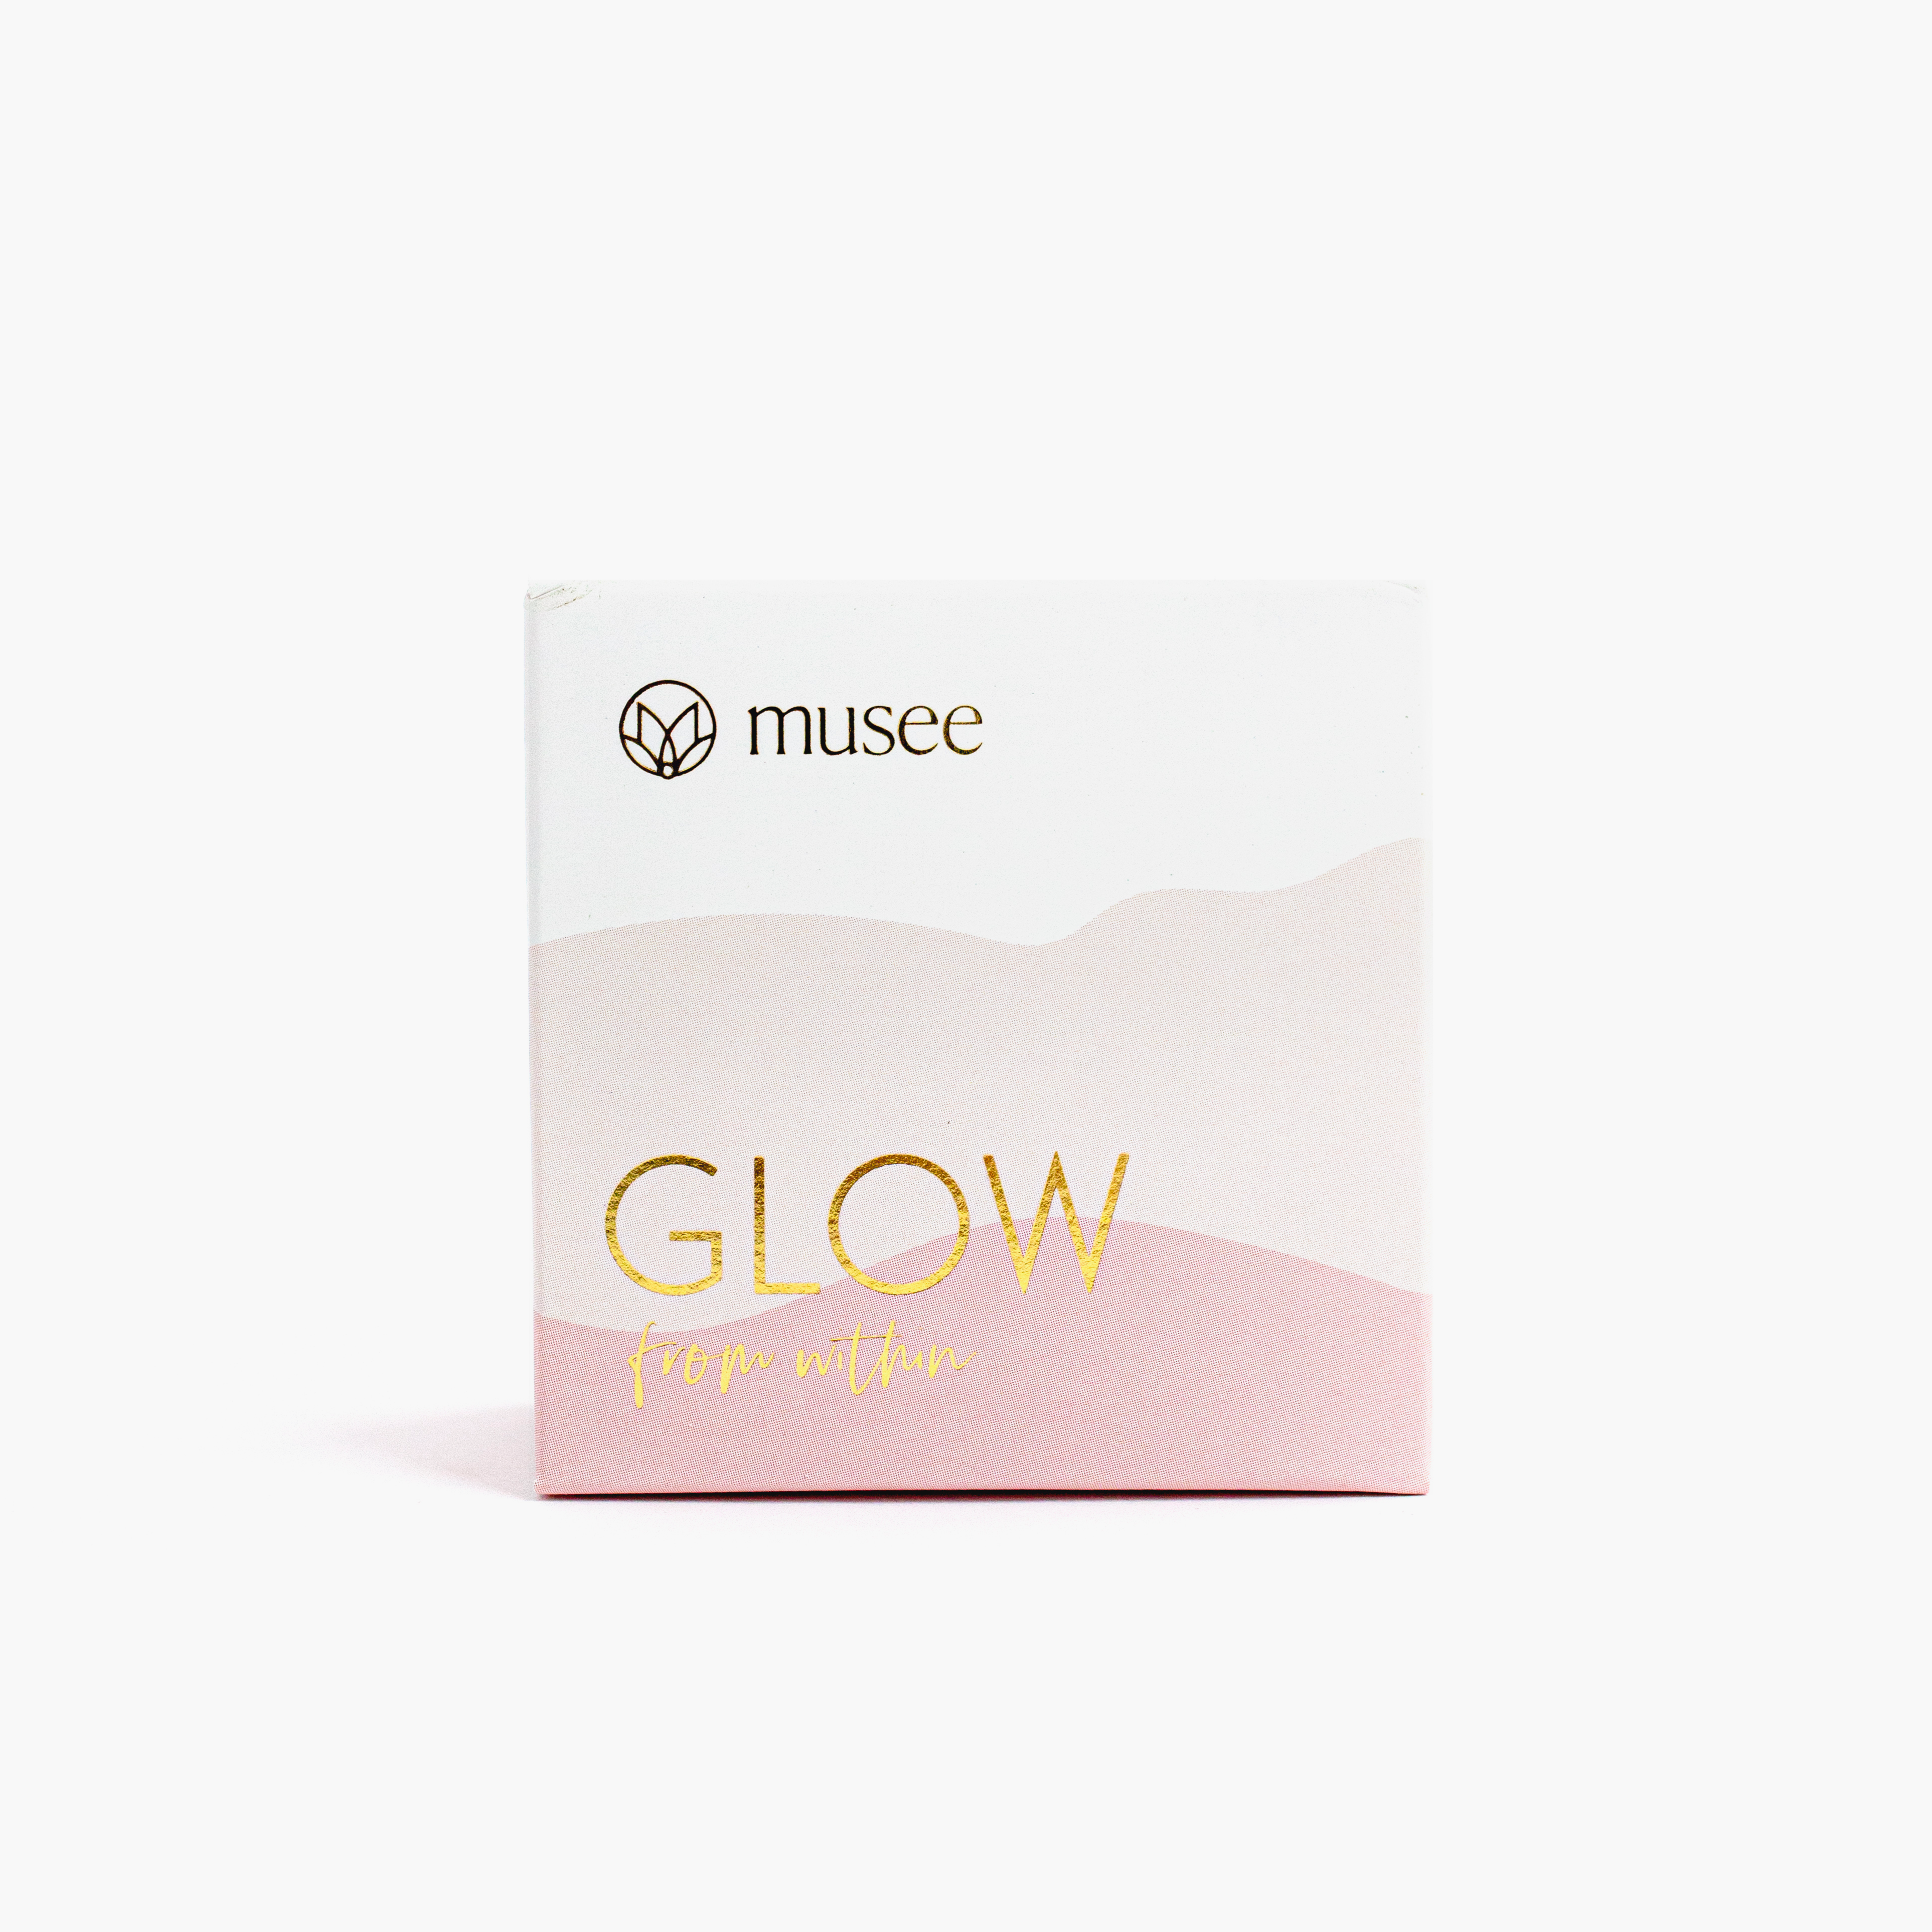 Pink box of soap bar with gold foil writing reading "Glow from within"